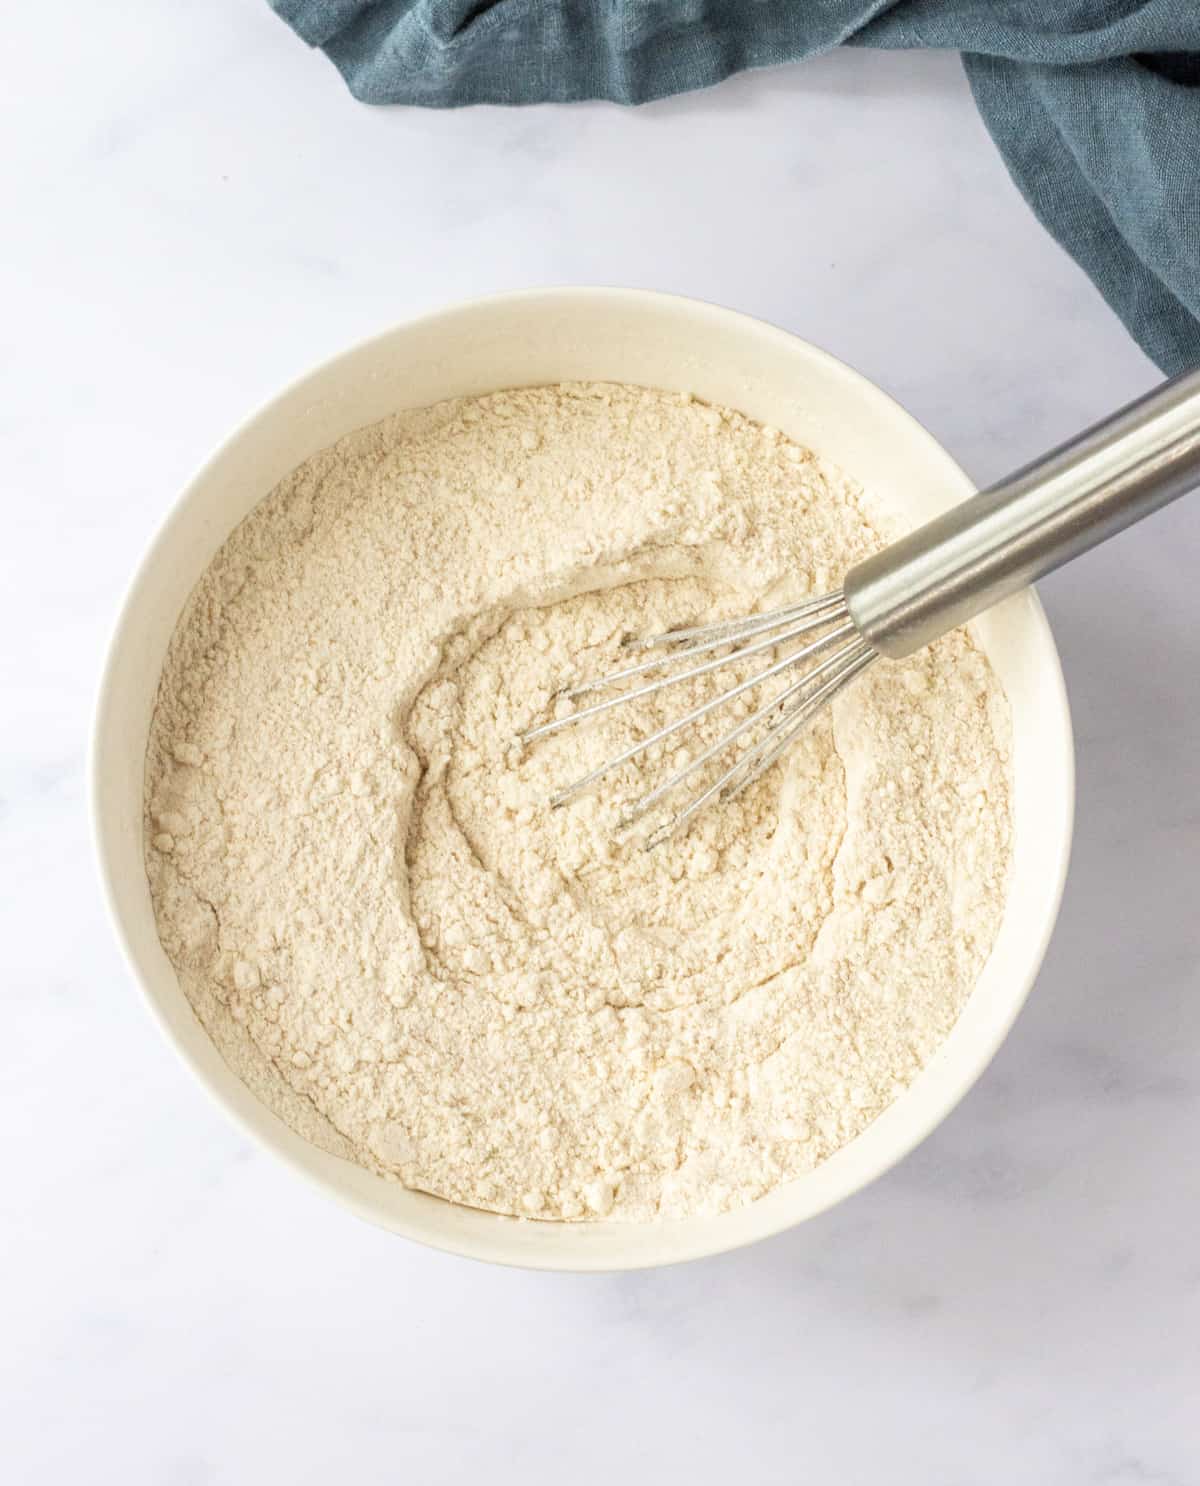 Dry ingredients whisked together in a bowl with a whisk.